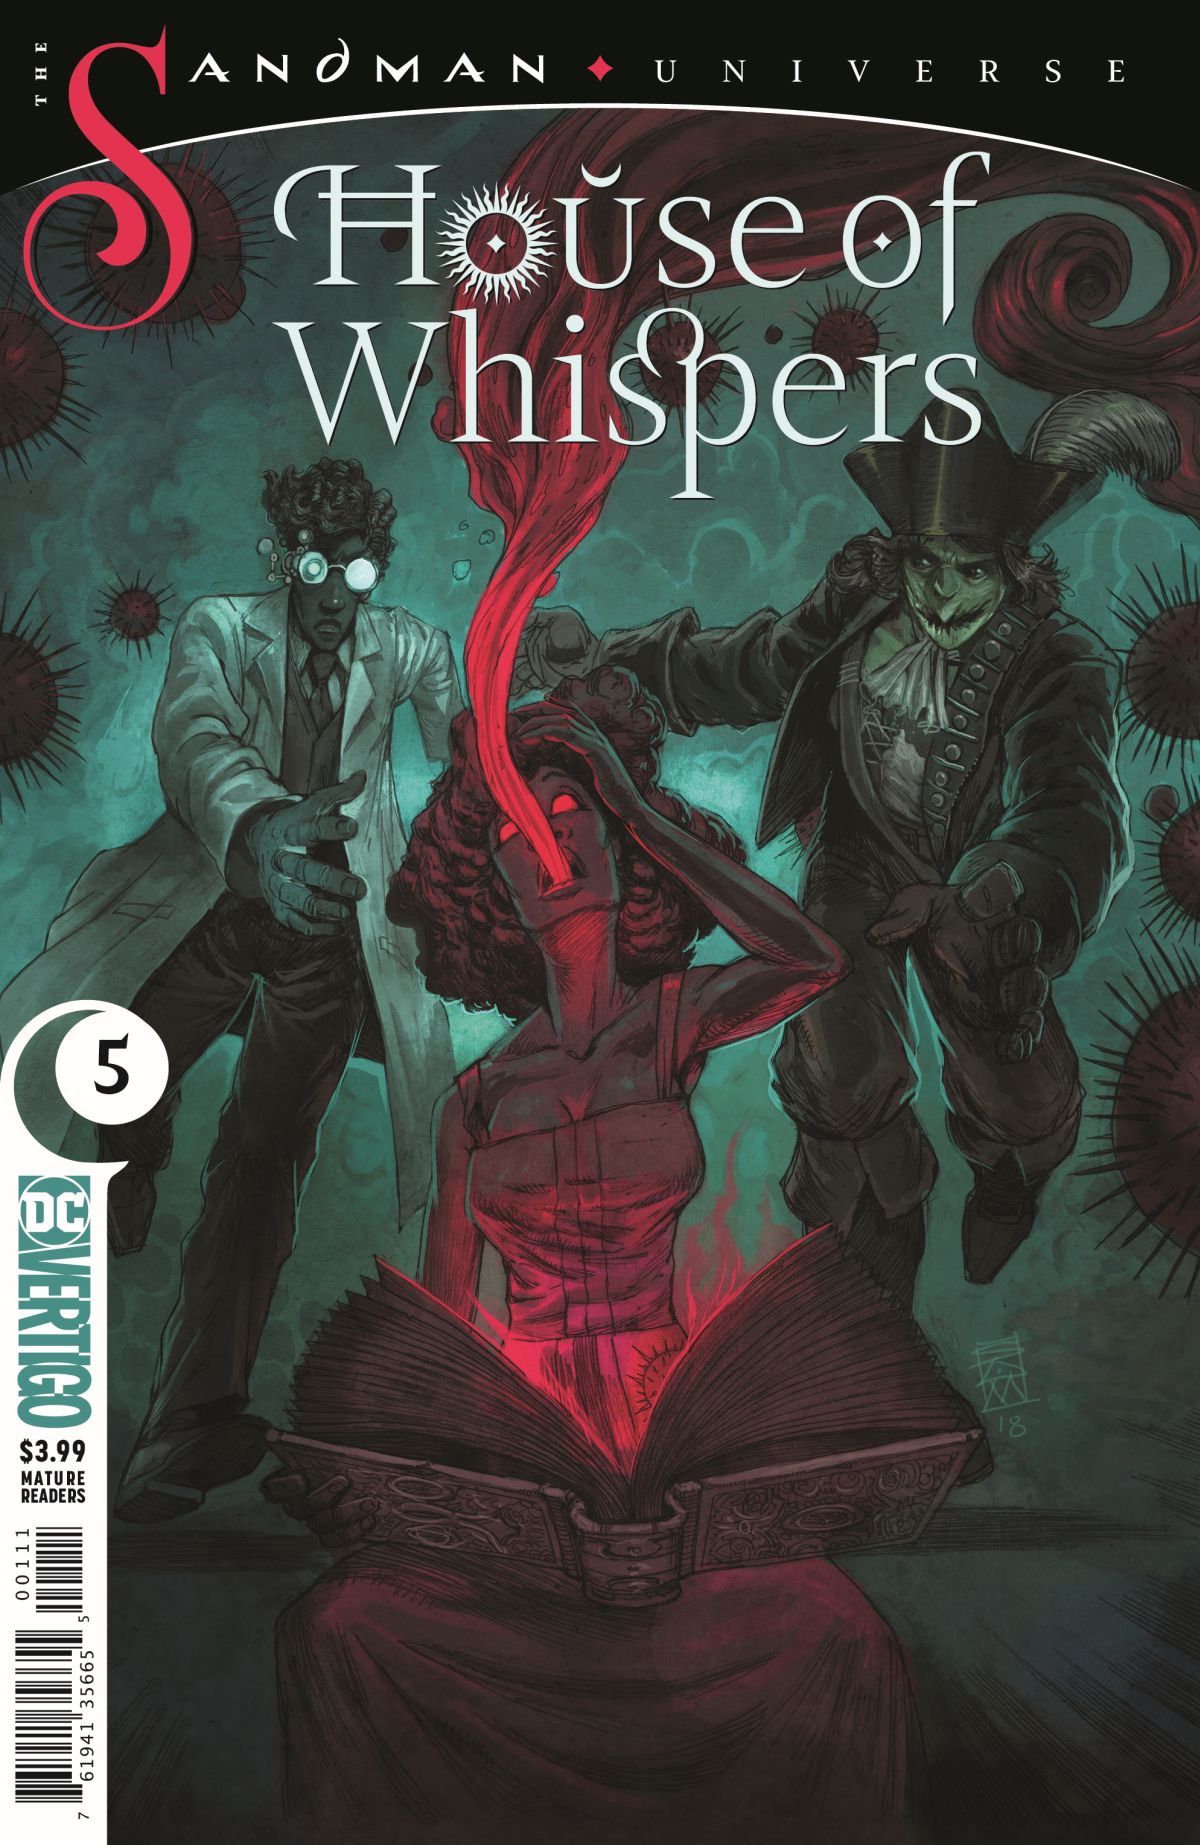 HOUSE OF WHISPERS #5 